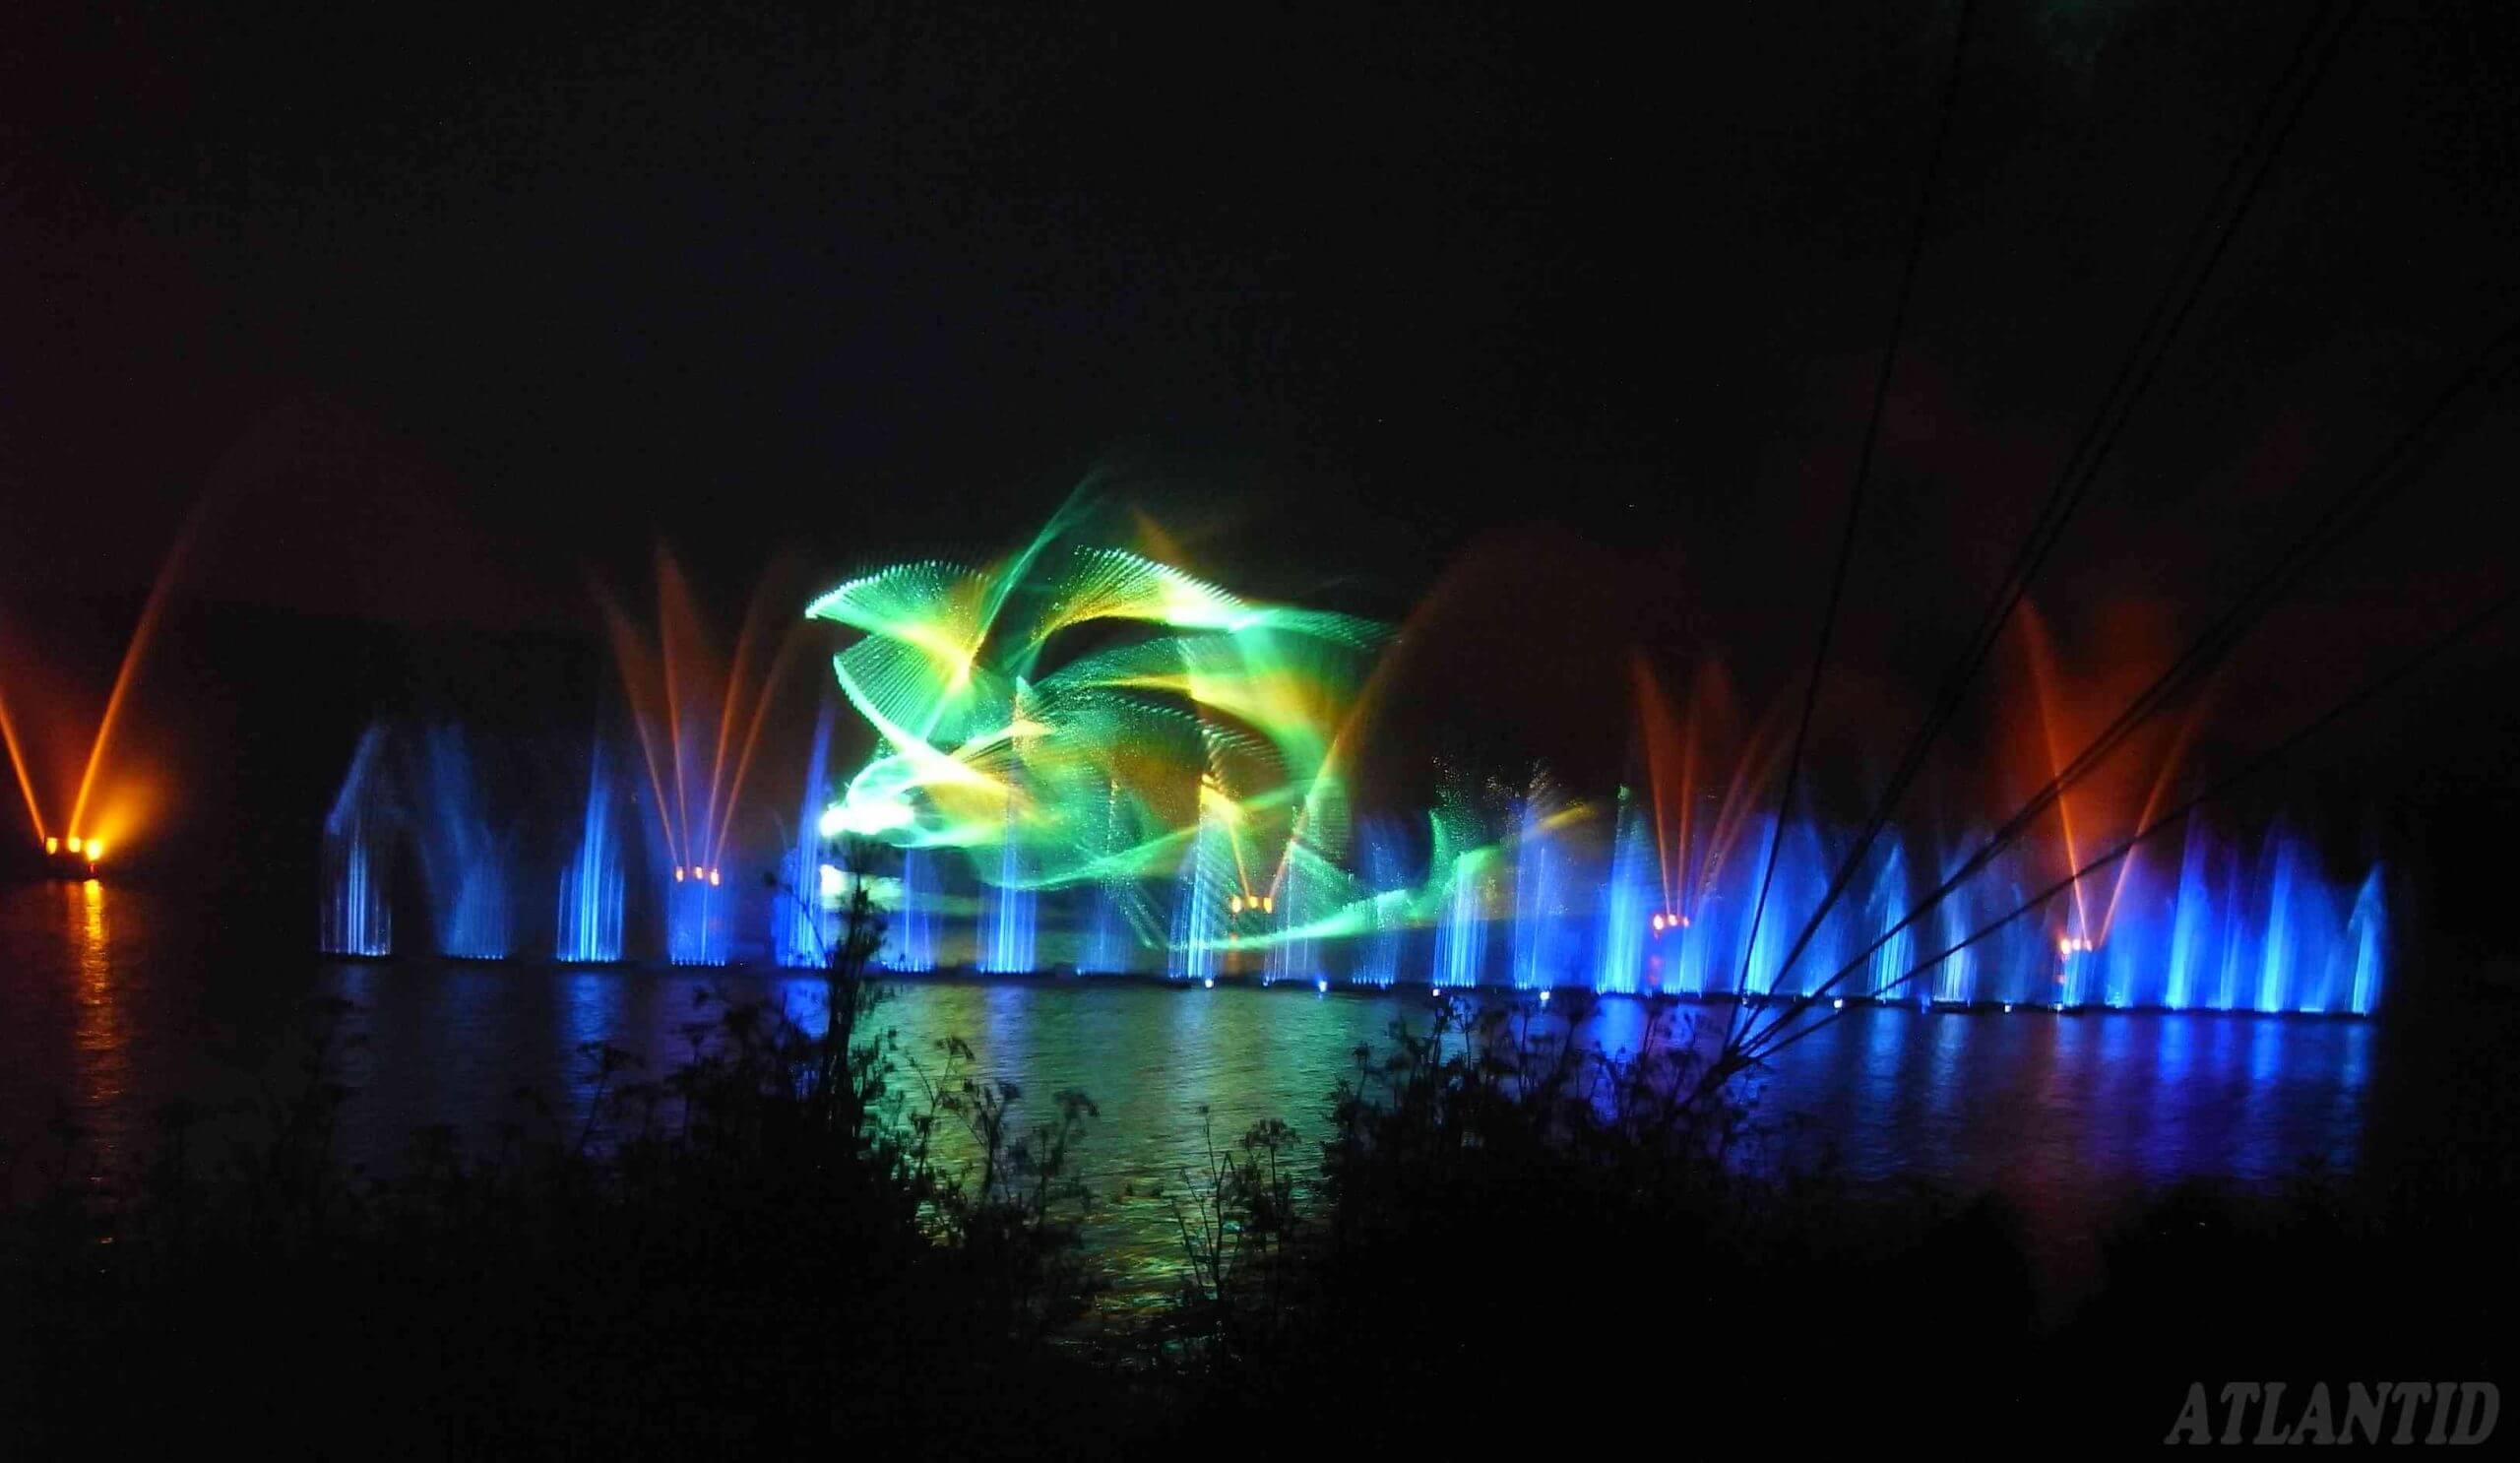 Atlantid - Aquatic show with projection of multicolored lasers